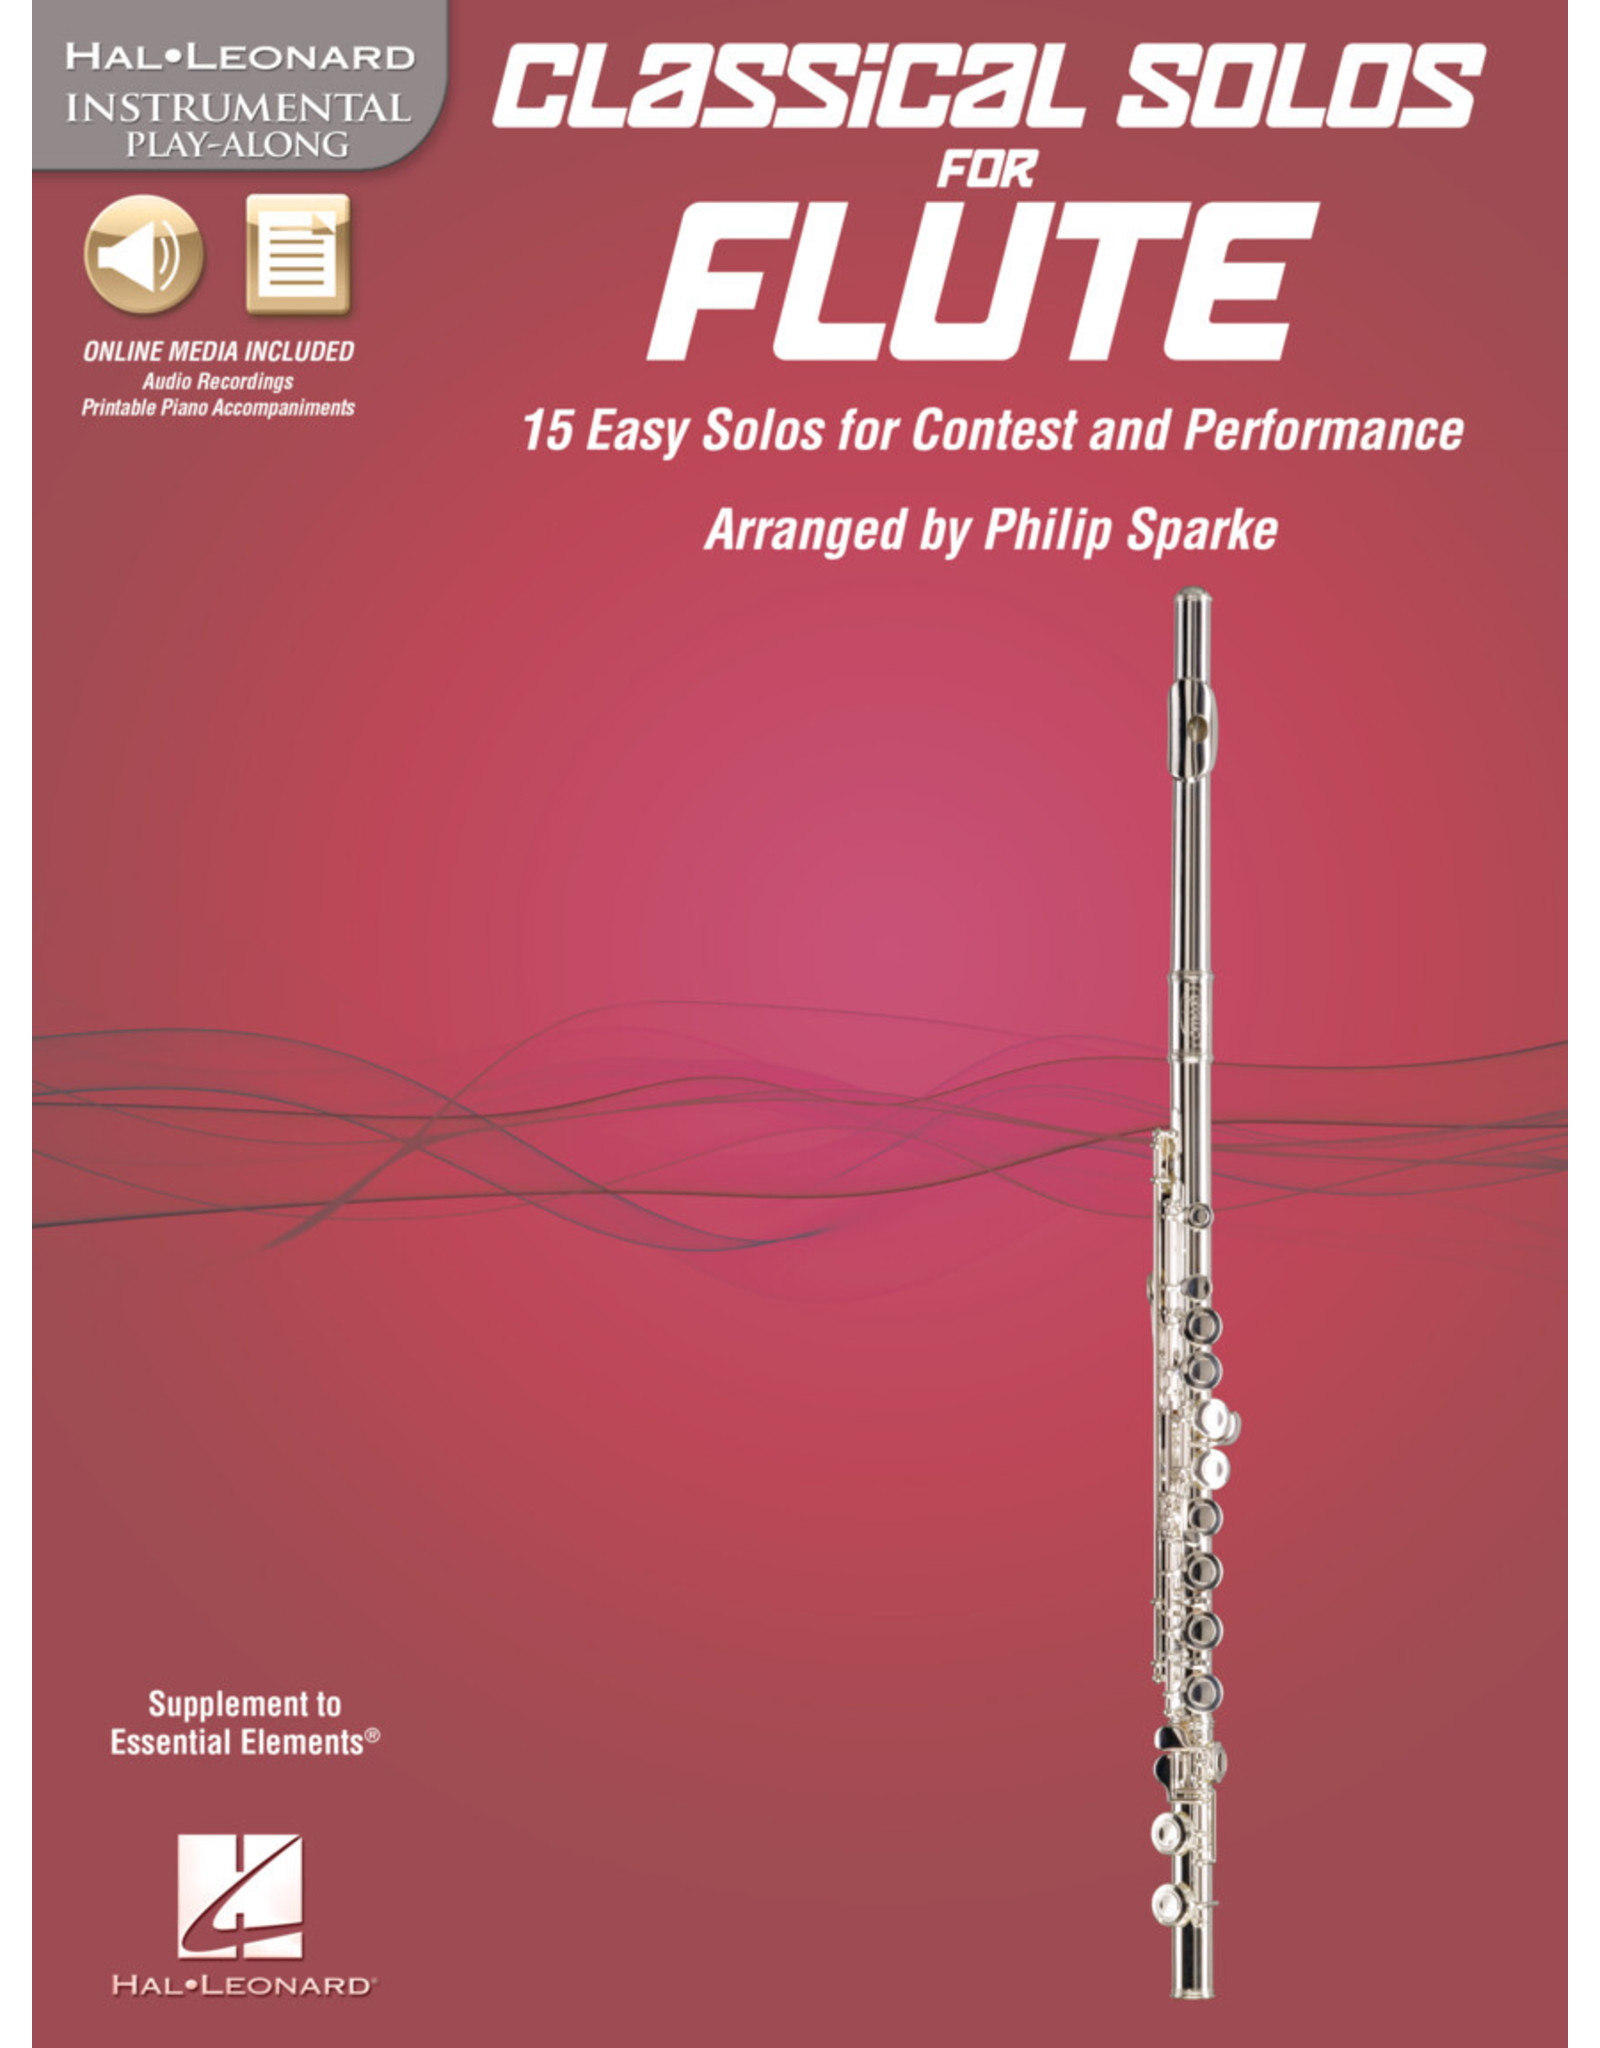 Hal Leonard Classical Solos for Flute 15 Easy Solos for Contest and Performance Softcover Audio Online arr. Philip Sparke Book/Online Audio